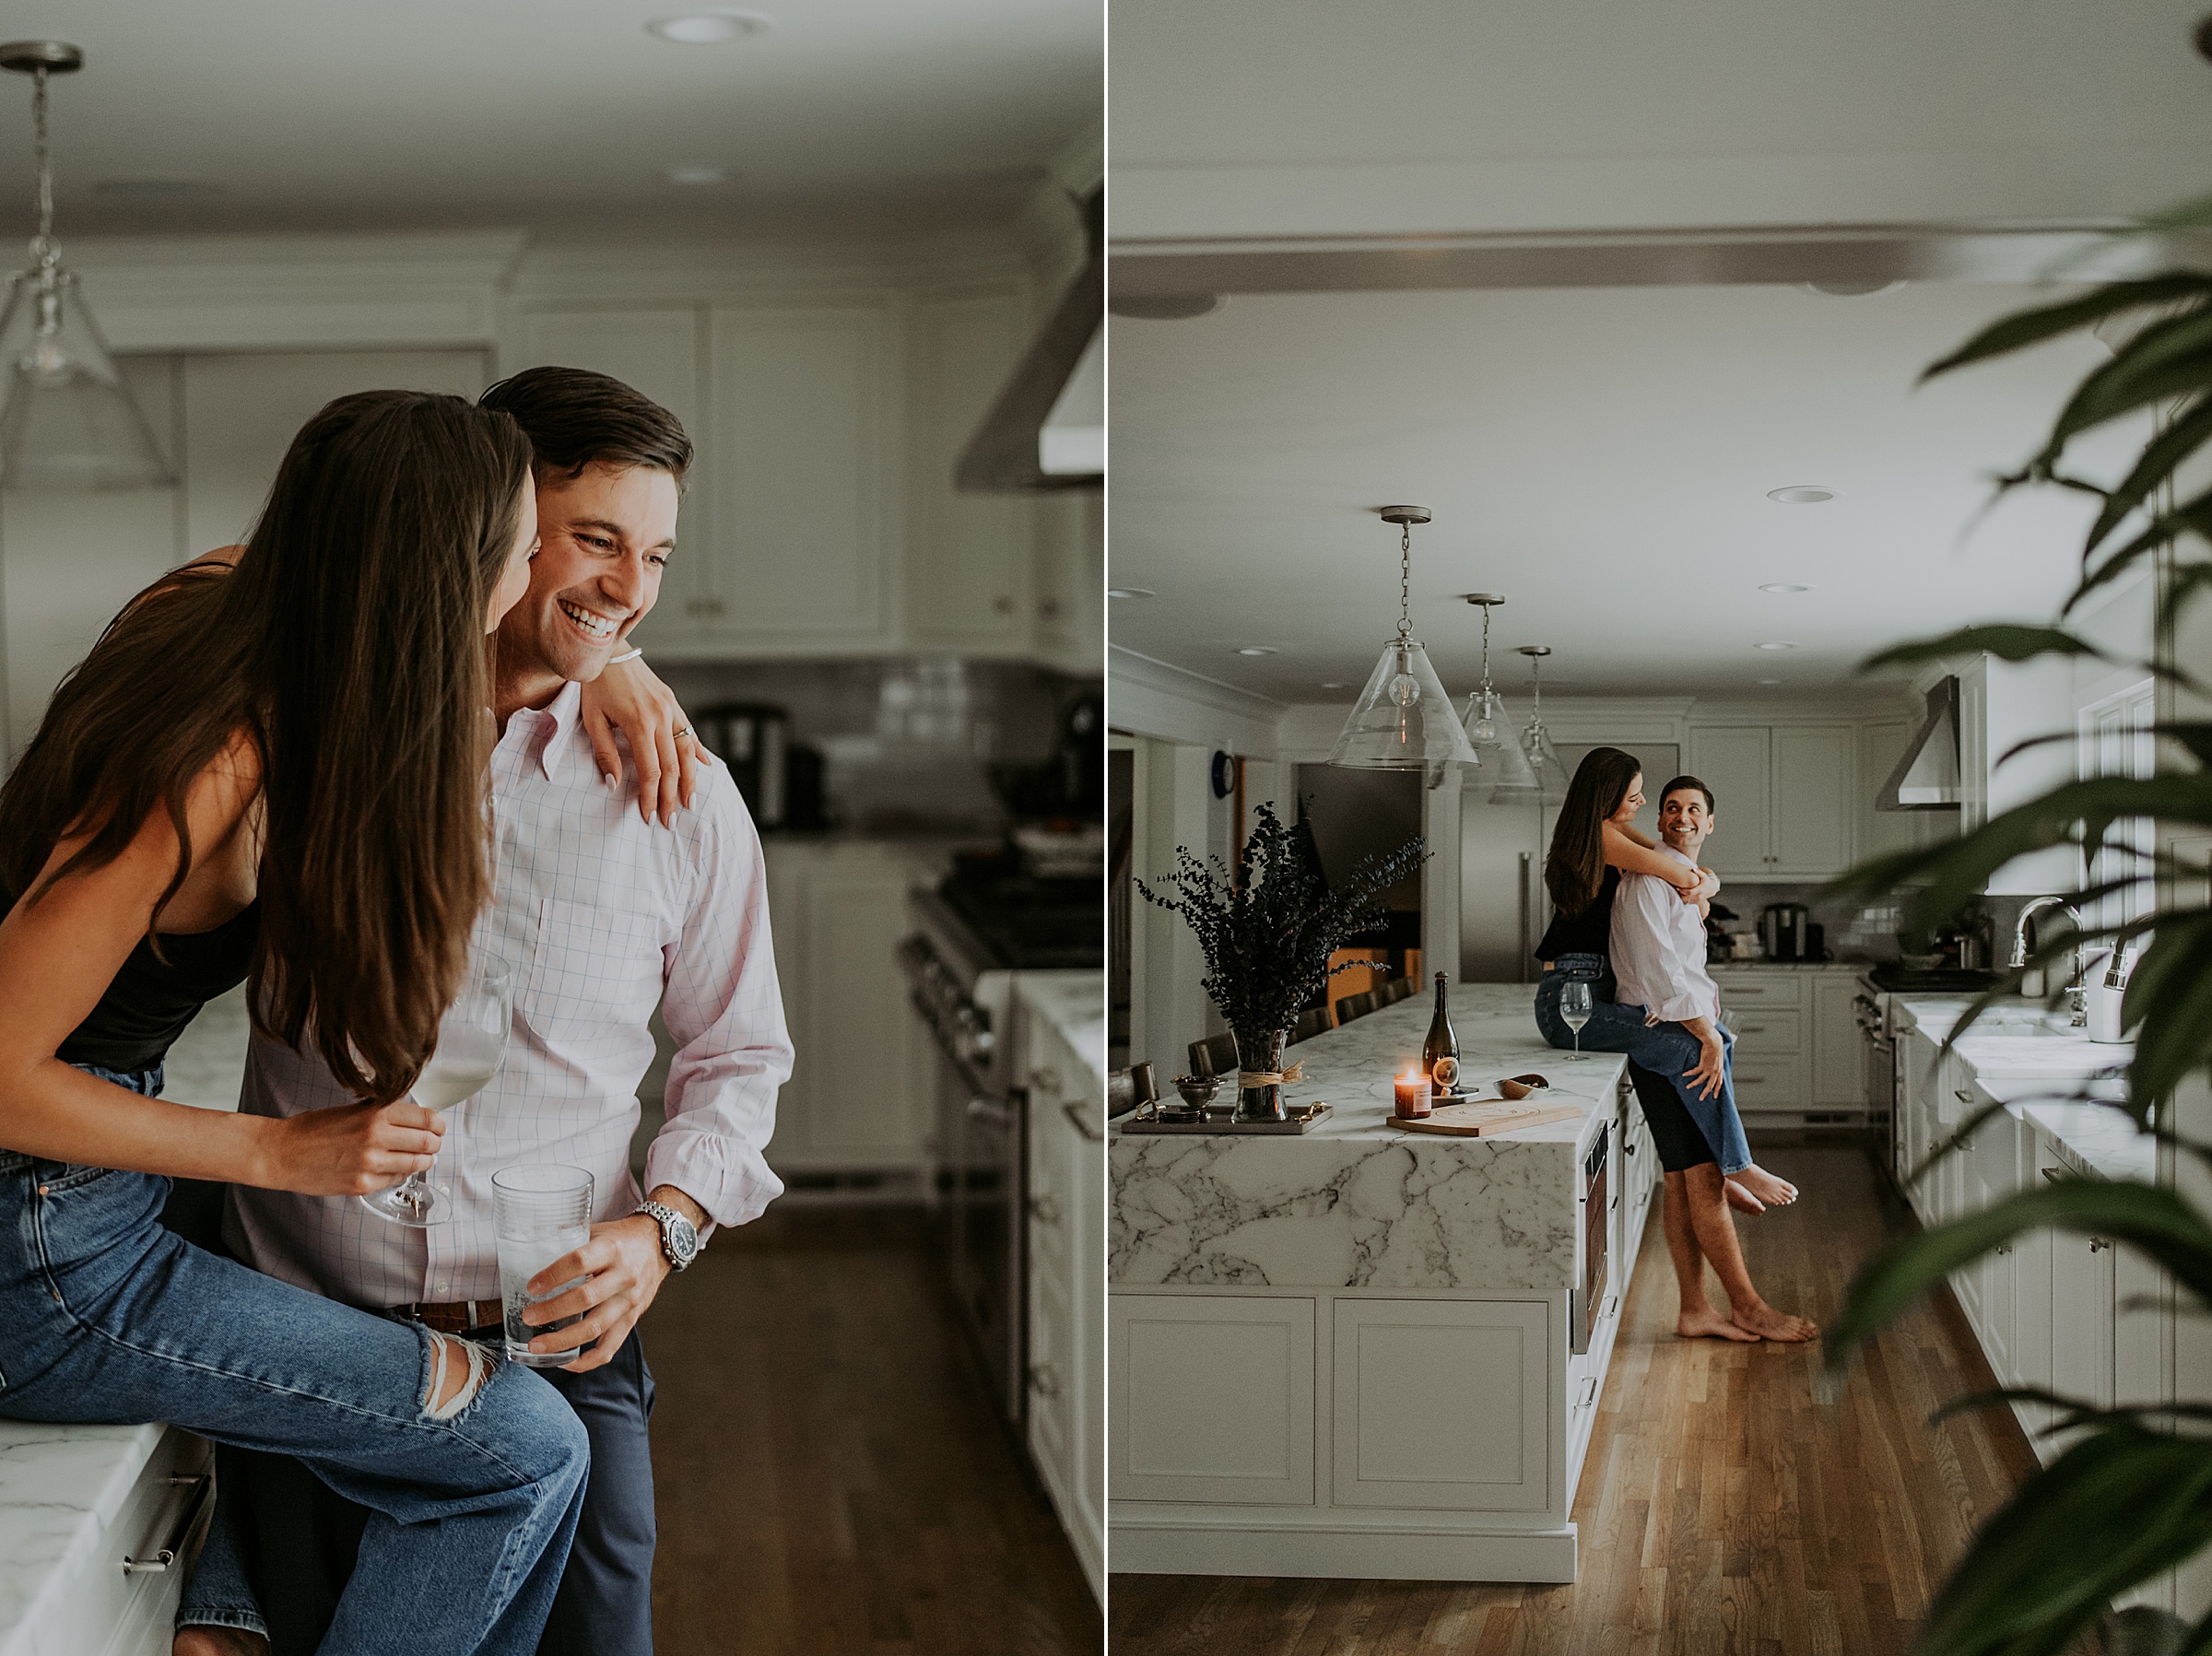 at home engagement session, New Jersey Wedding Photographer, New York Wedding Photographer, Intimate Engagement, Cozy rainy day, Chatham NJ